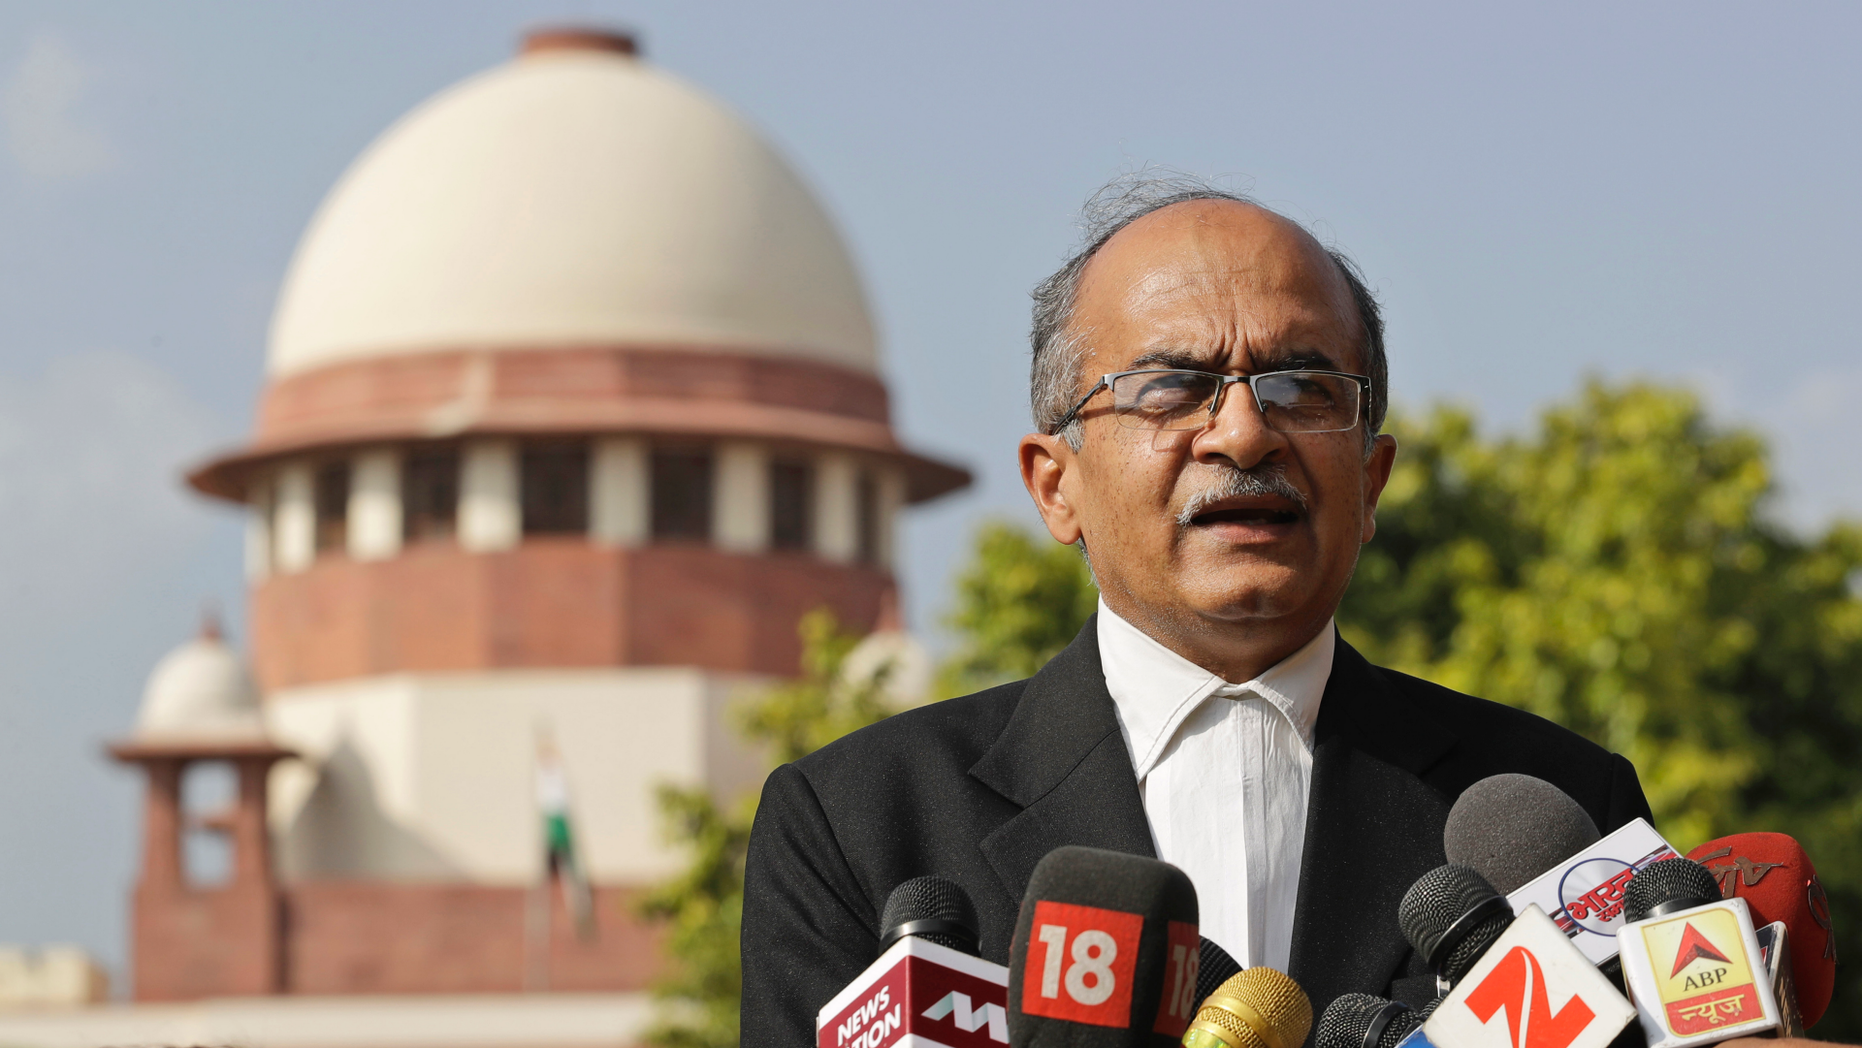 FILE - In this Sept. 4, 2017 file photo, Indian lawyer and social activist Prashant Bhushan speaks to the journalists about the petition filed by two Rohingya Muslim refugees against their deportation to Myanmar, outside the Supreme Court in New Delhi, India. India's top court has allowed the federal government to send seven Rohingya Muslims back to Myanmar in the first deportation of members of the Myanmar minority group since it last year ordered their identification. The Supreme Court on Thursday, Oct. 4, 2018 rejected a plea by Bhushan, a defense attorney, to let them live in India as they feared reprisal in Myanmar. They were arrested in 2012 for entering India illegally and have been held in a prison. (AP Photo/Tsering Topgyal, File)